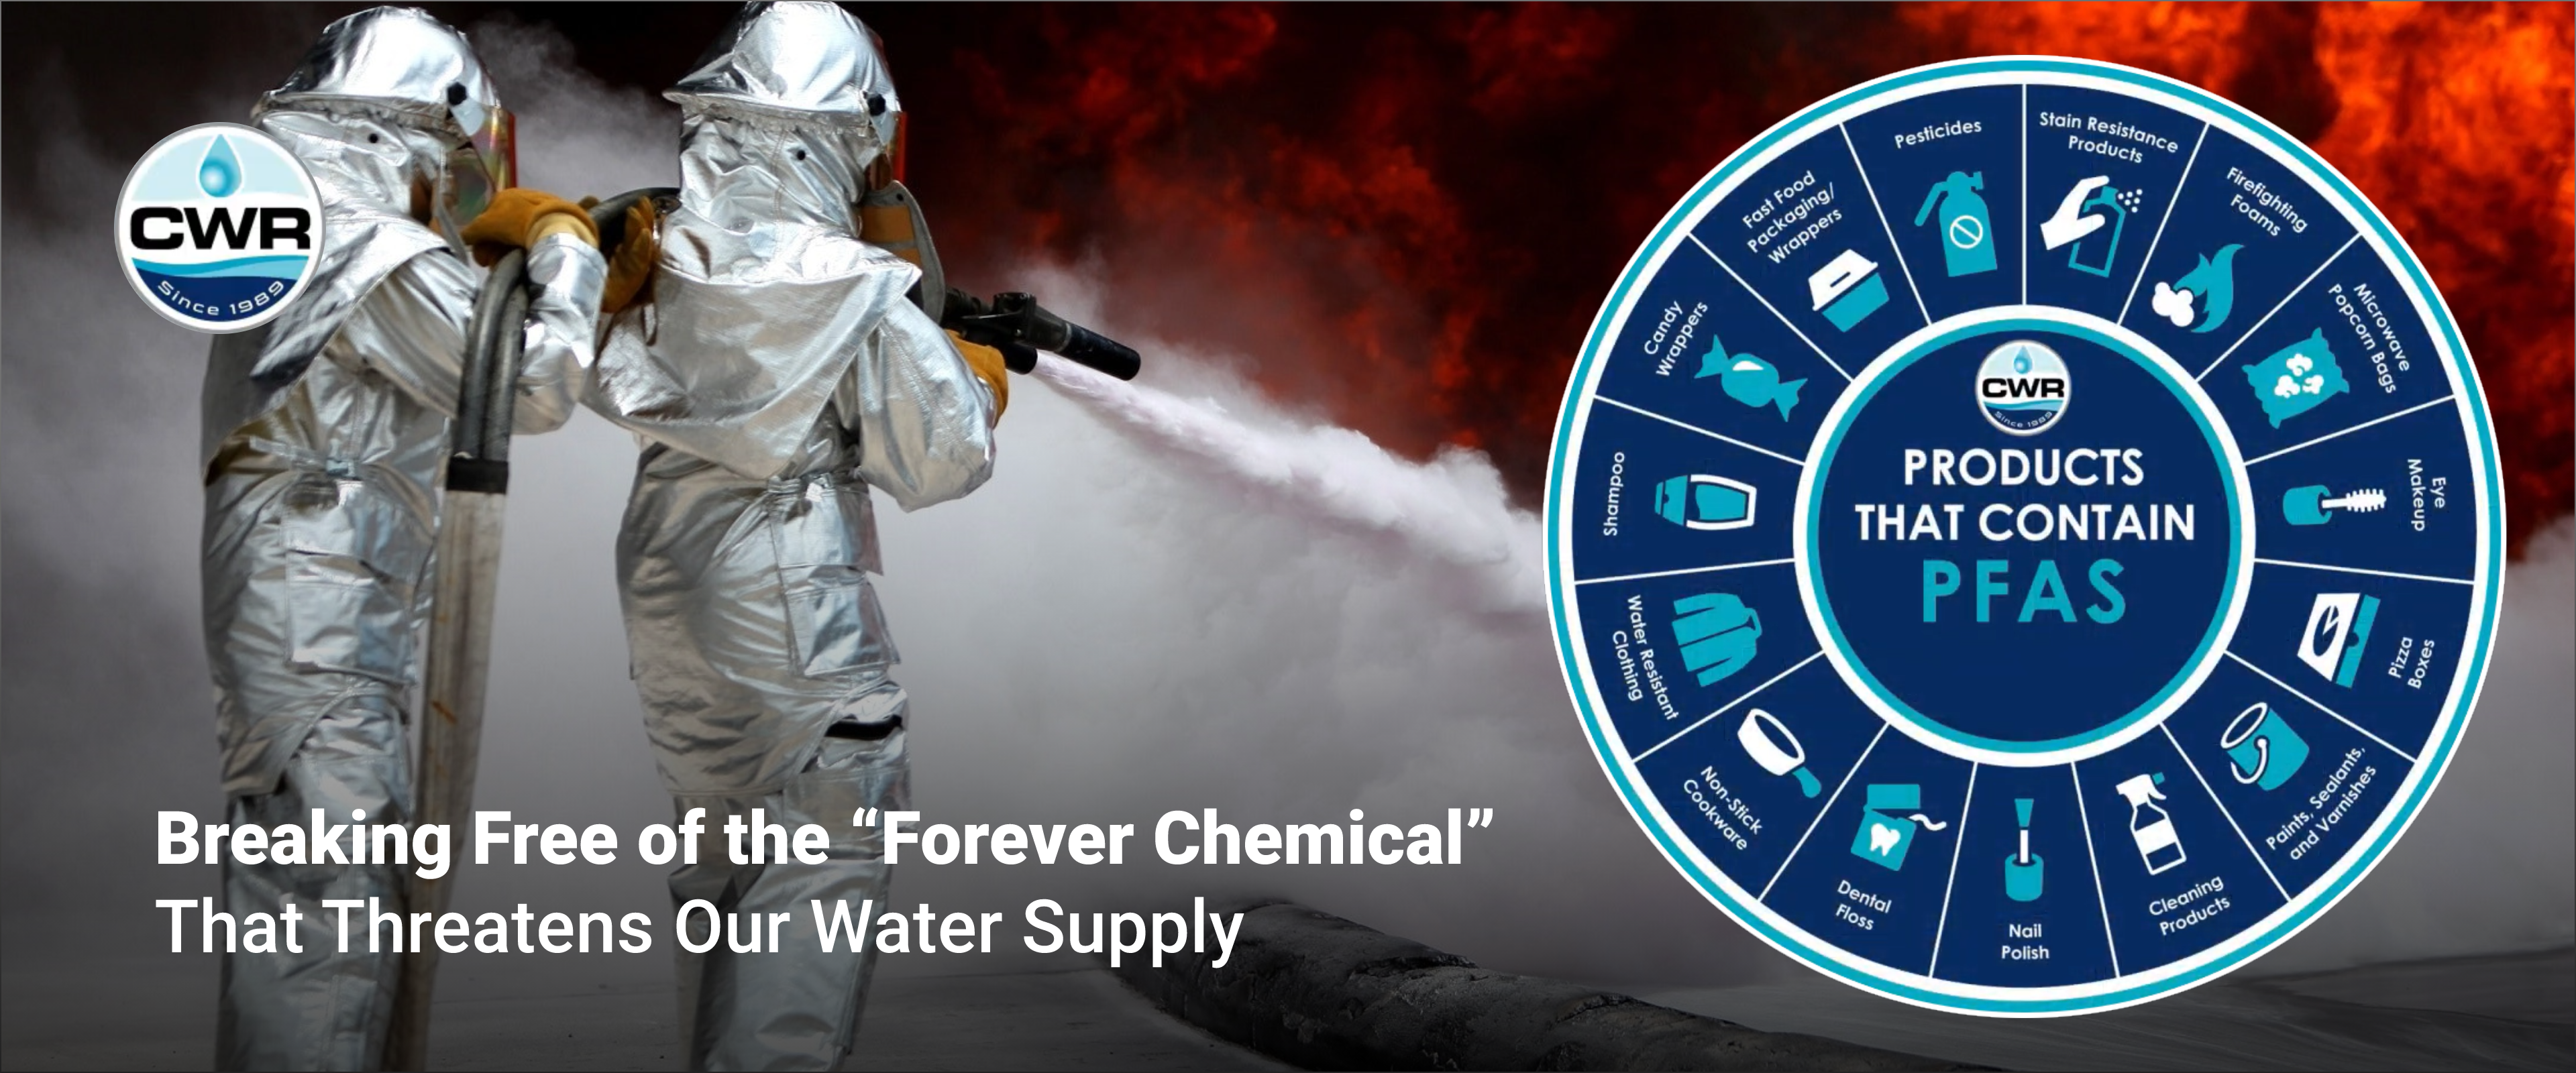 Breaking Free of the “Forever Chemical” That Threatens Our Water Supply -  Clean Water Revival, Inc.